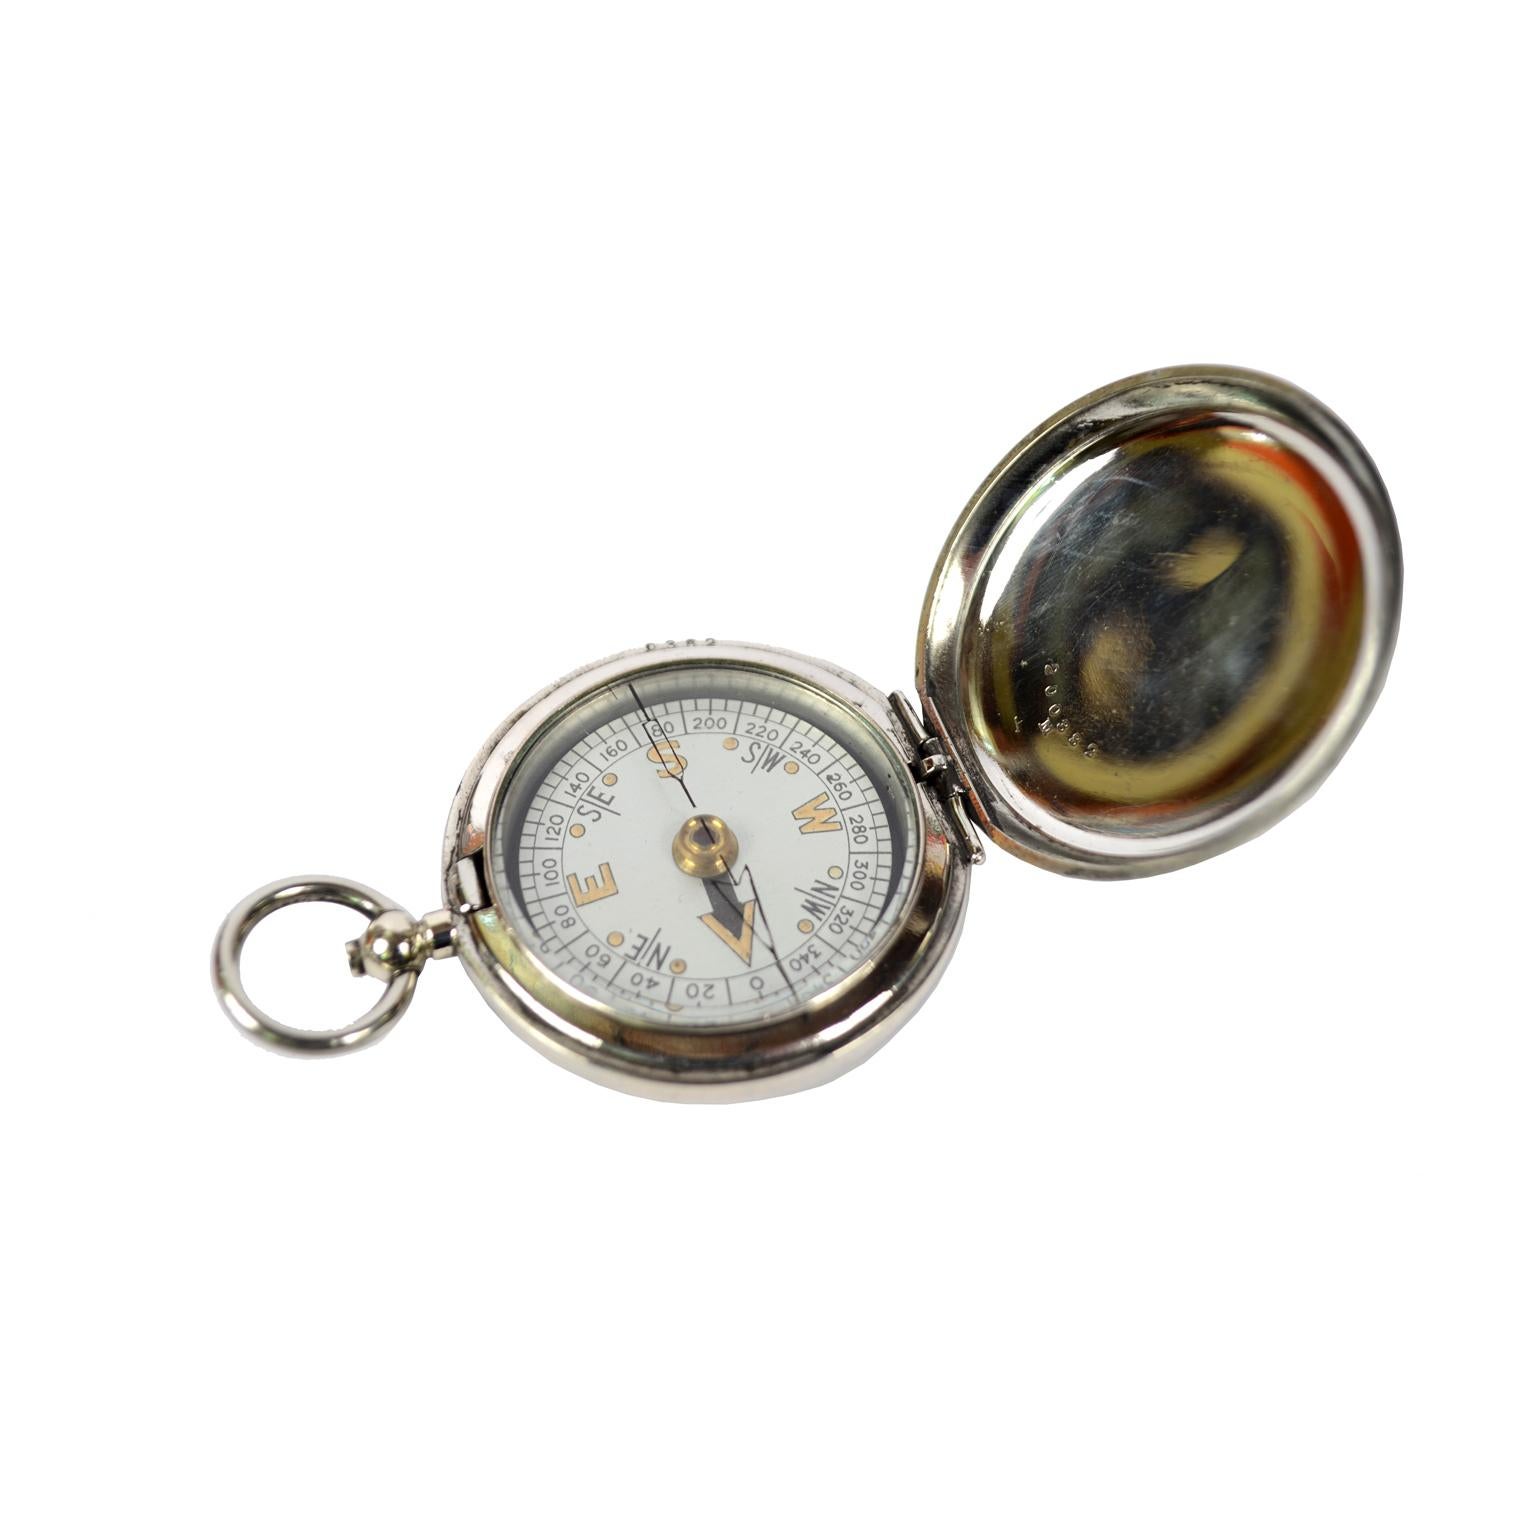 British Pocket Compass Used by RAF Officers, 1926